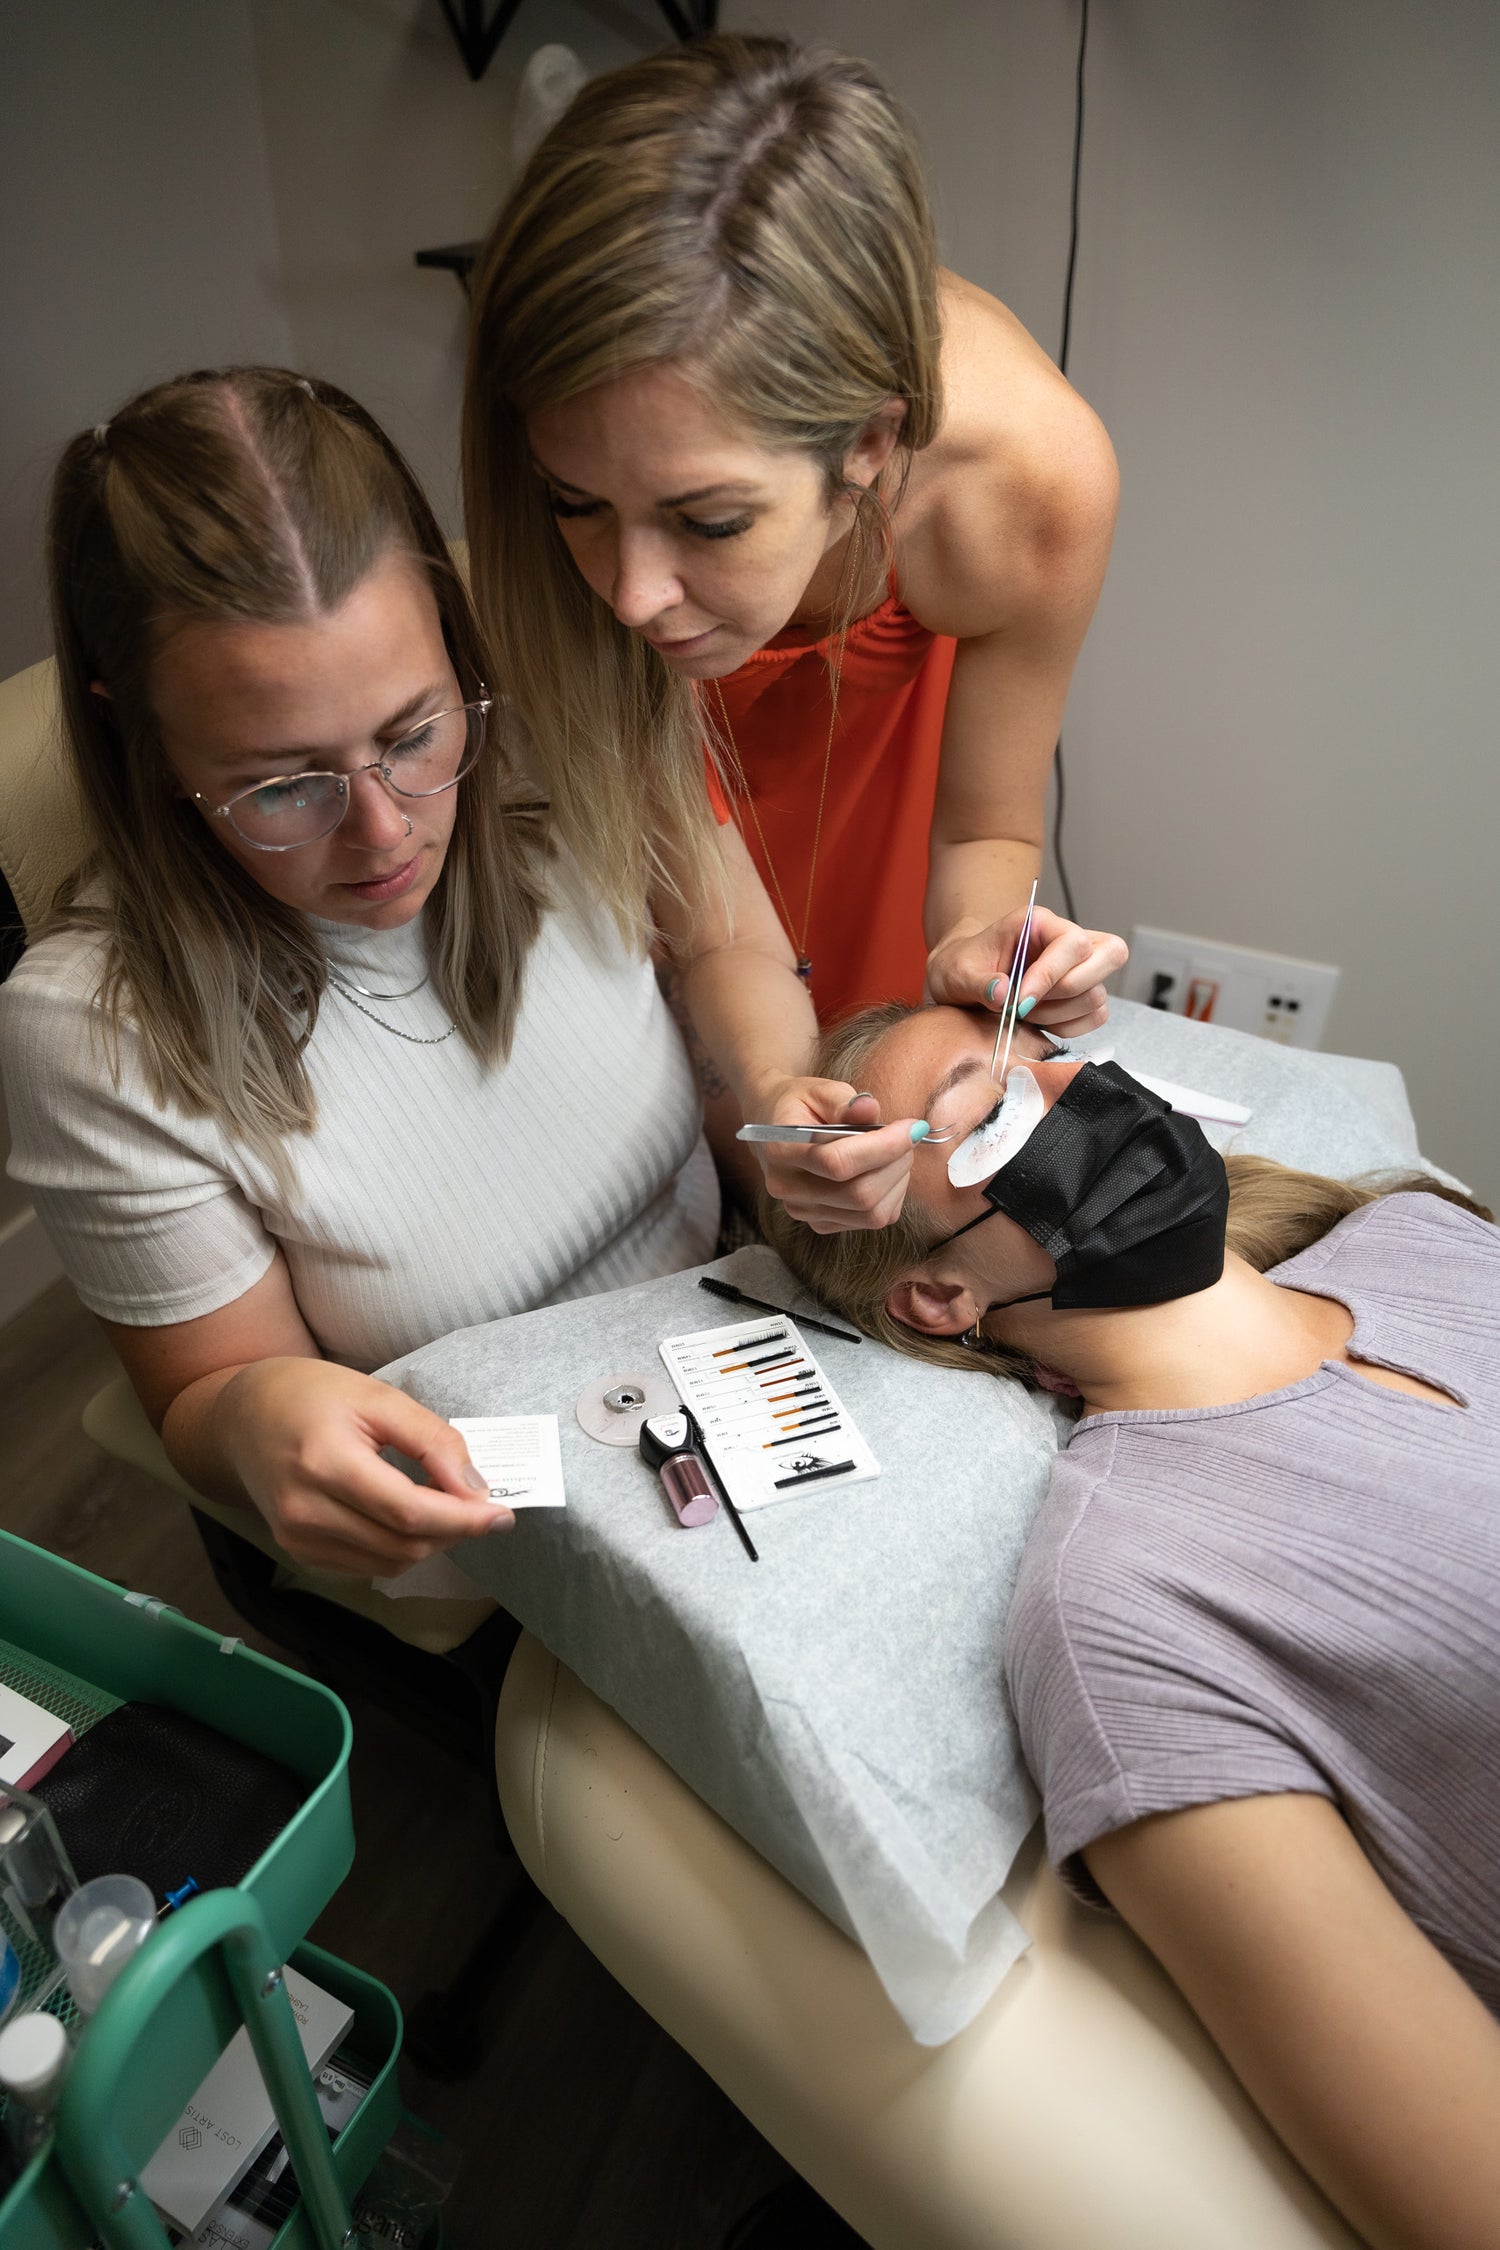 2 woman performing eyelash extension procedure and looking into materials for the procedure